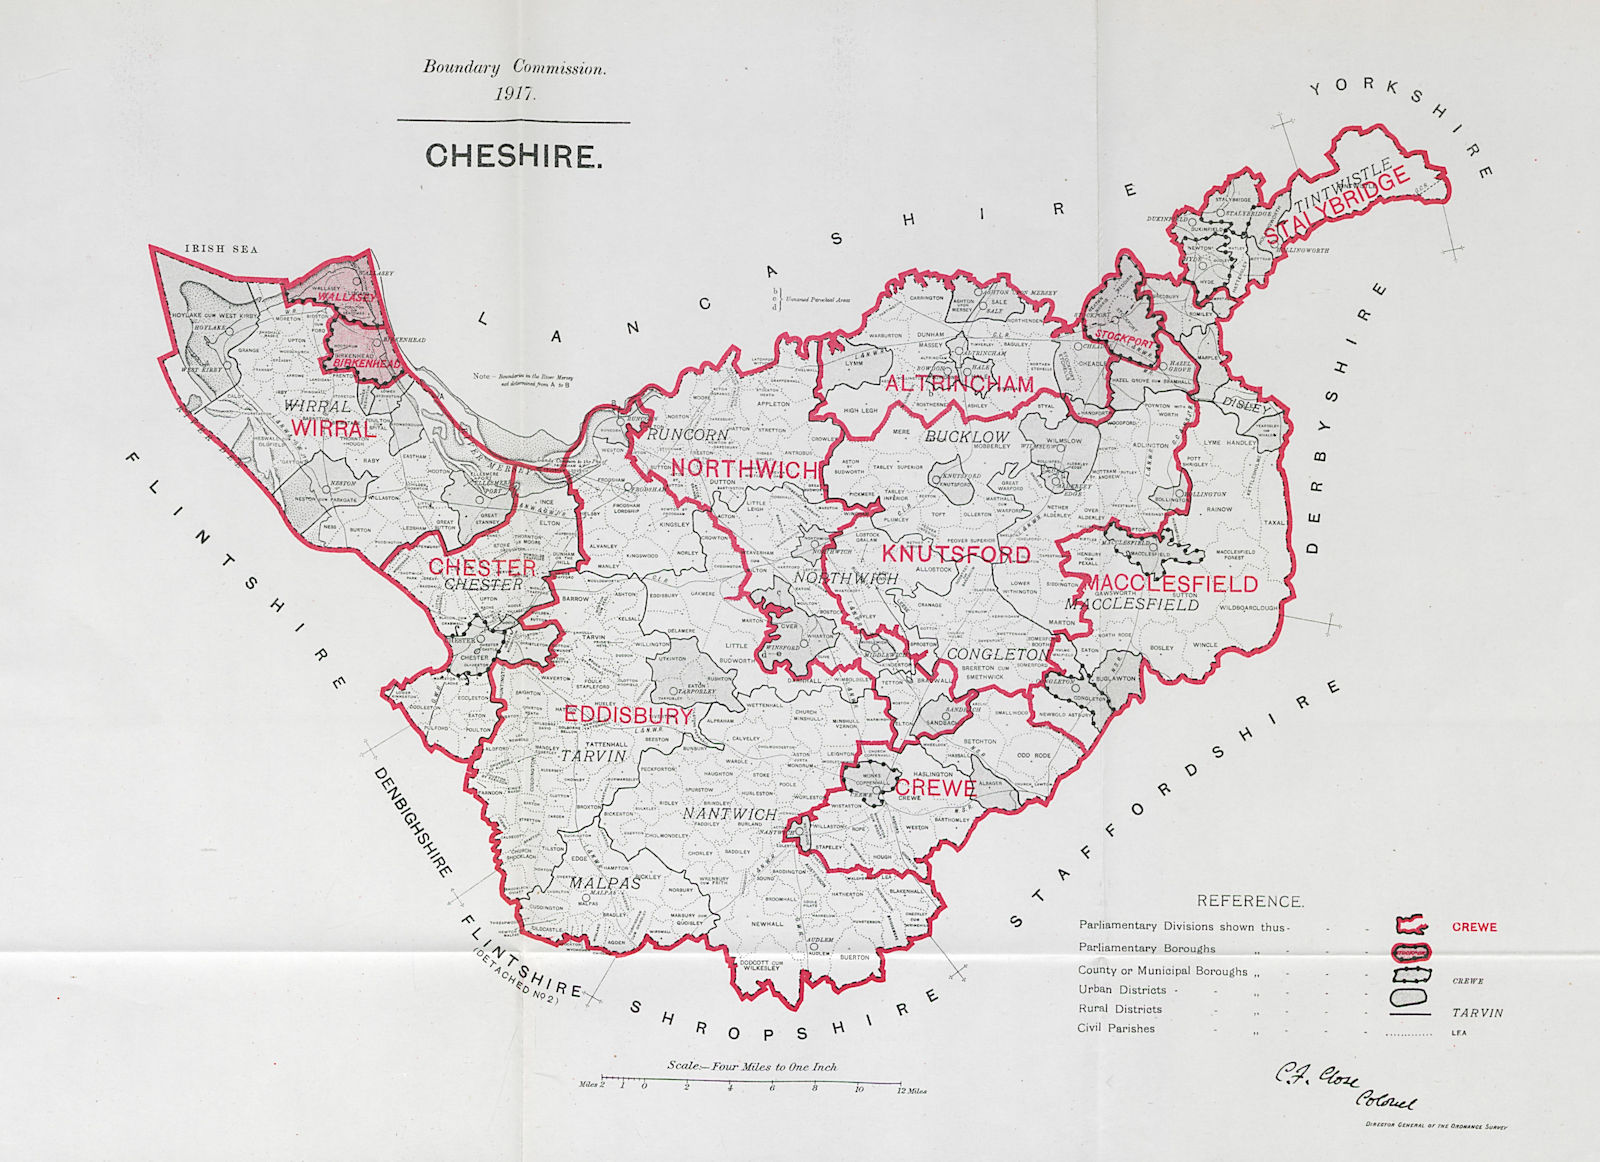 Associate Product Cheshire Parliamentary County. BOUNDARY COMMISSION. Close 1917 old antique map